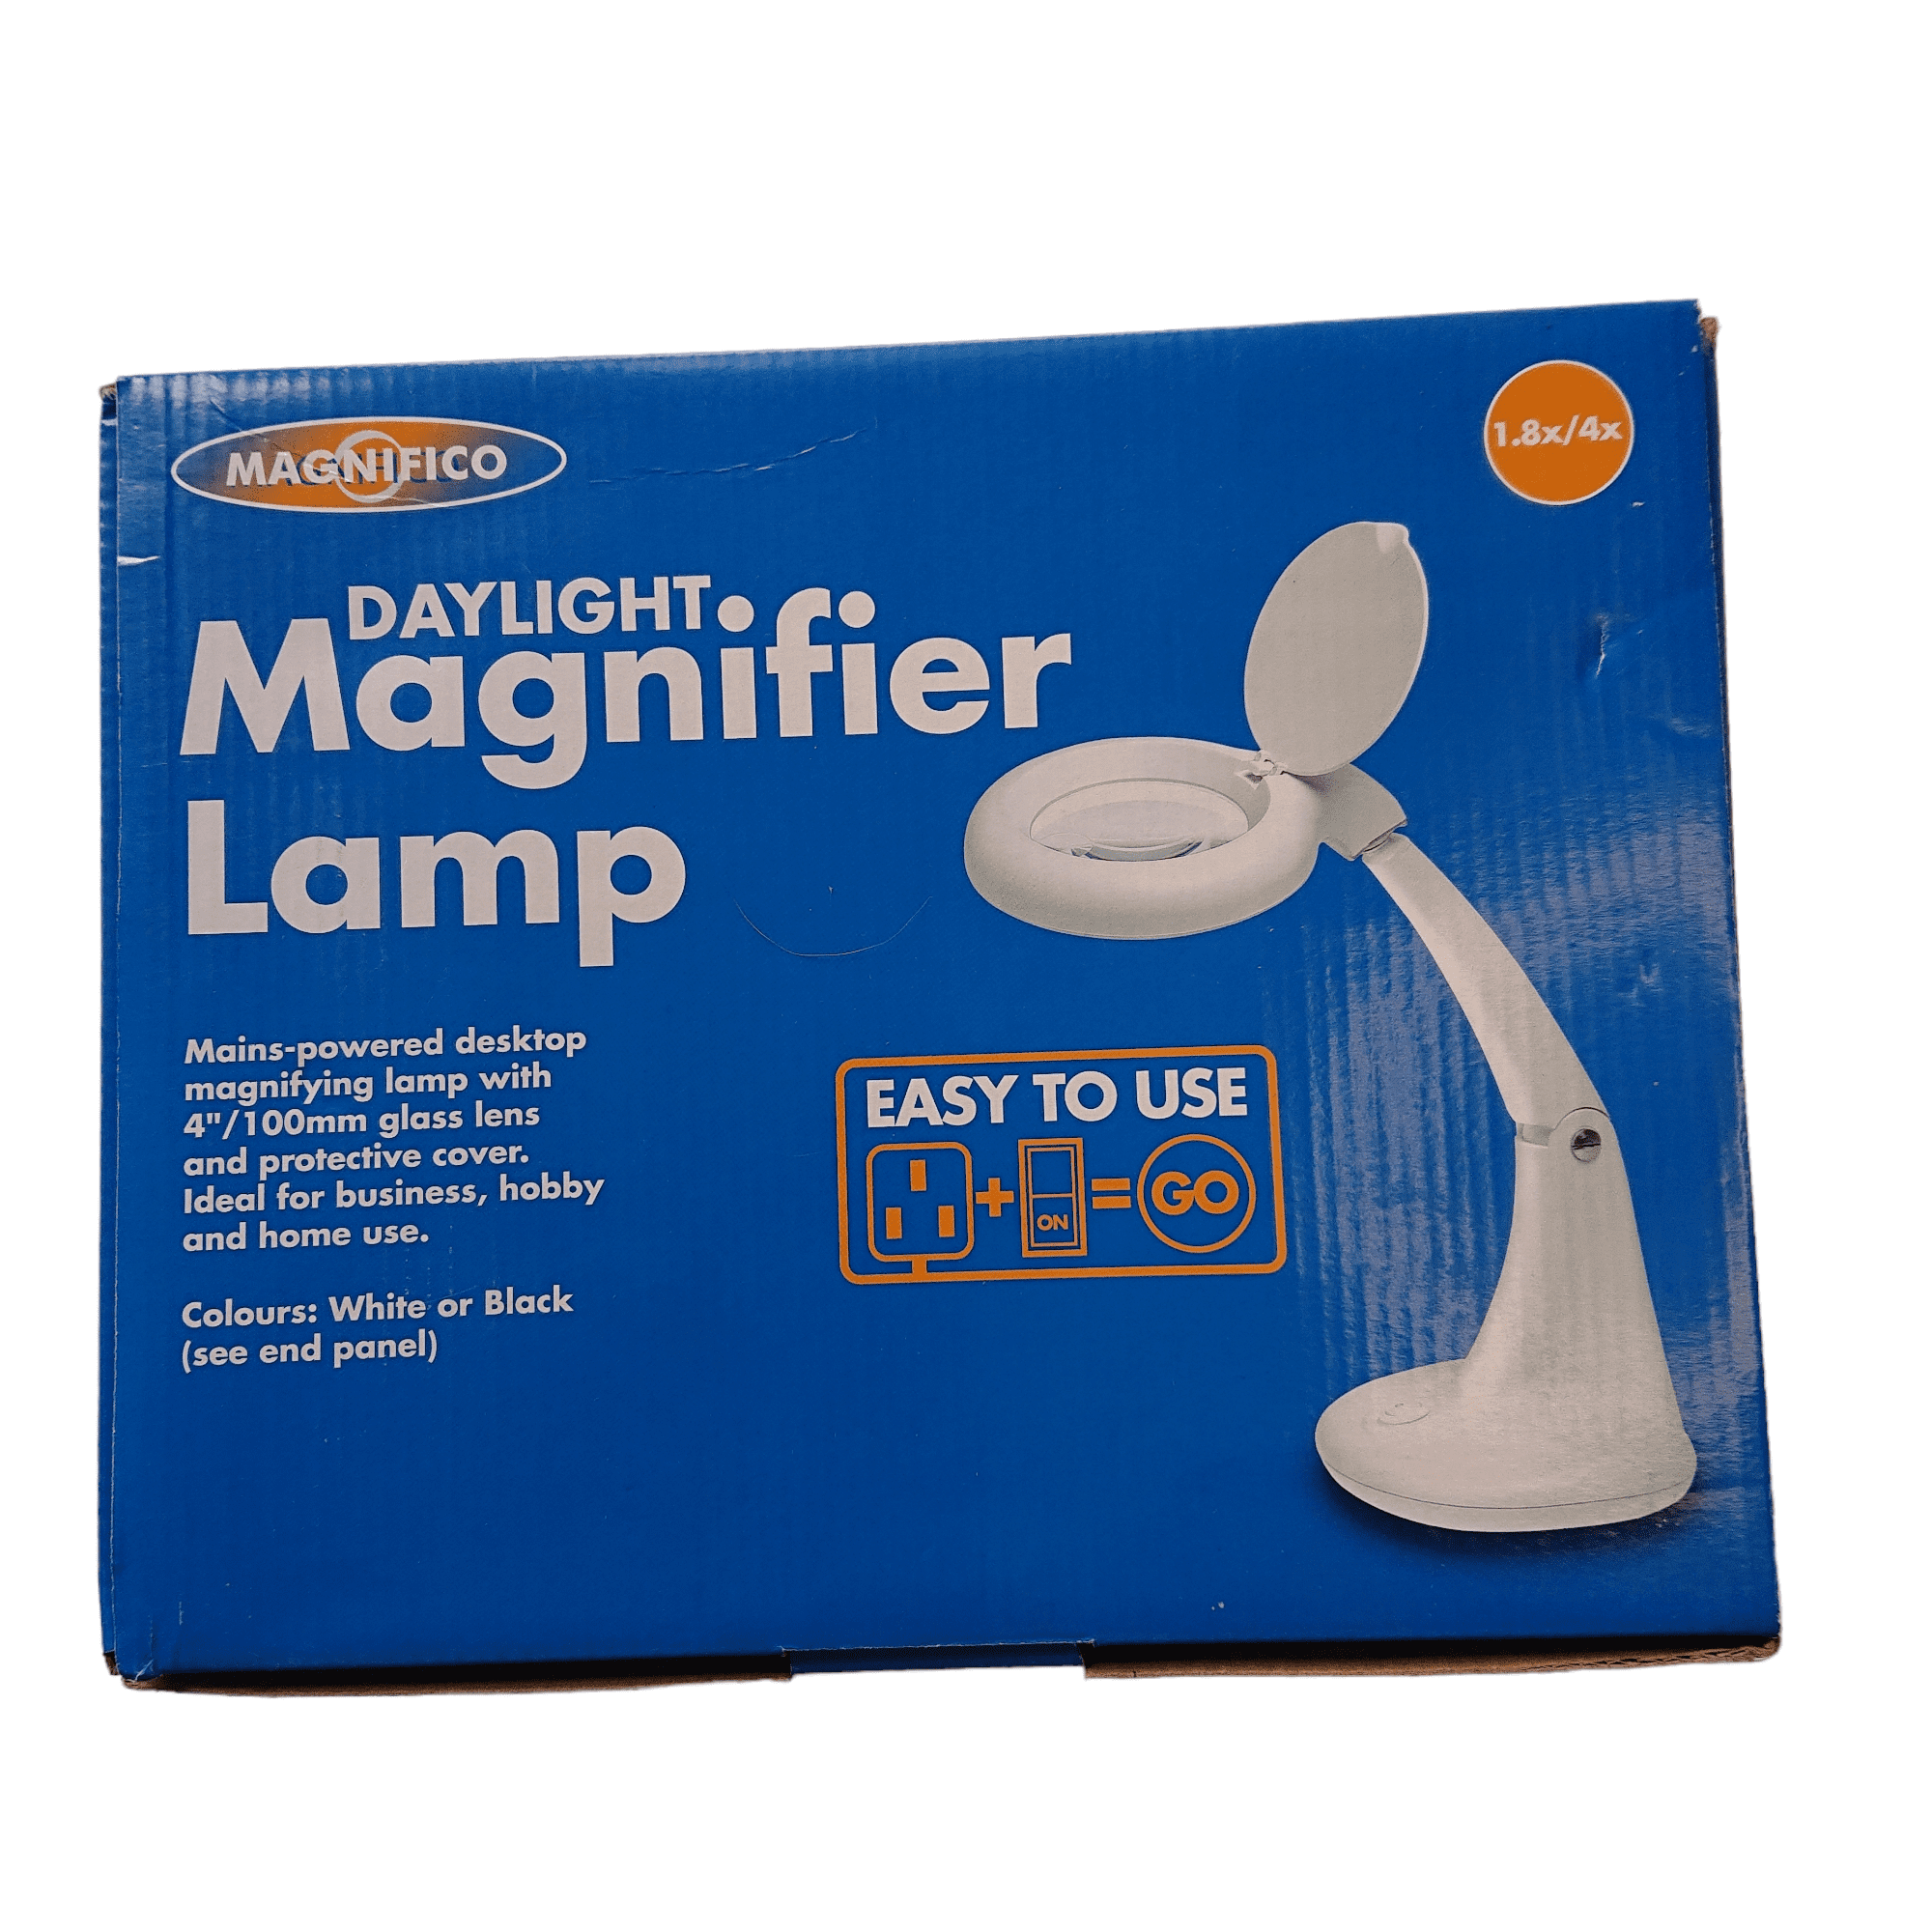 box of the daylight magnifier lamp with UK plug